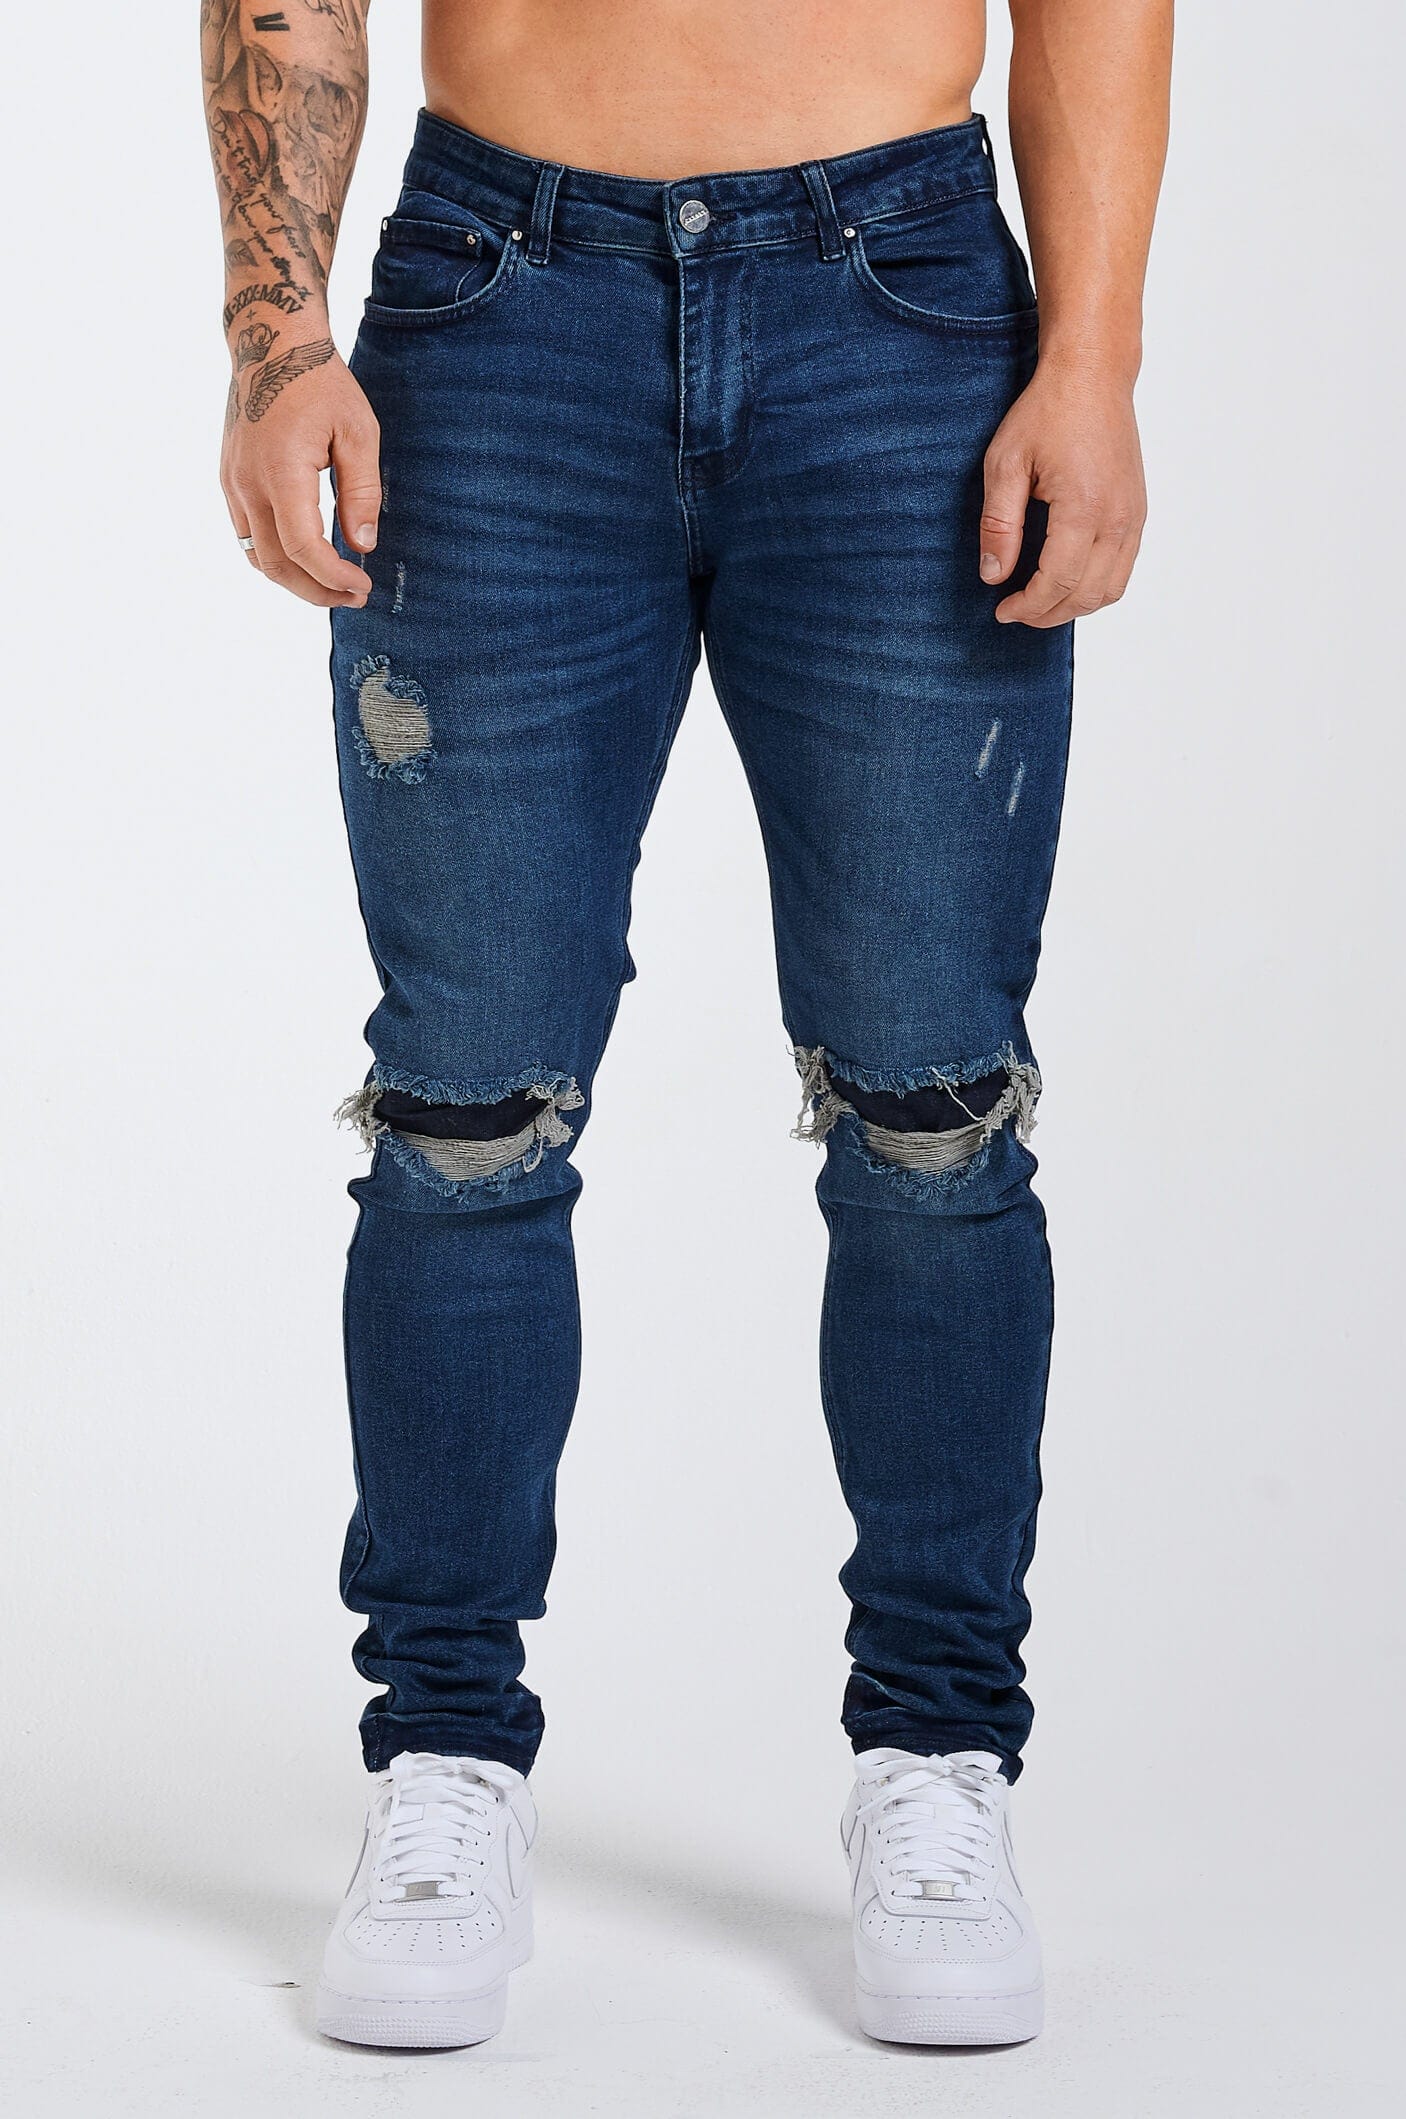 SLIM FIT JEANS 2.0 DISTRESSED AND PATCHED - DARK BLUE – Legend London